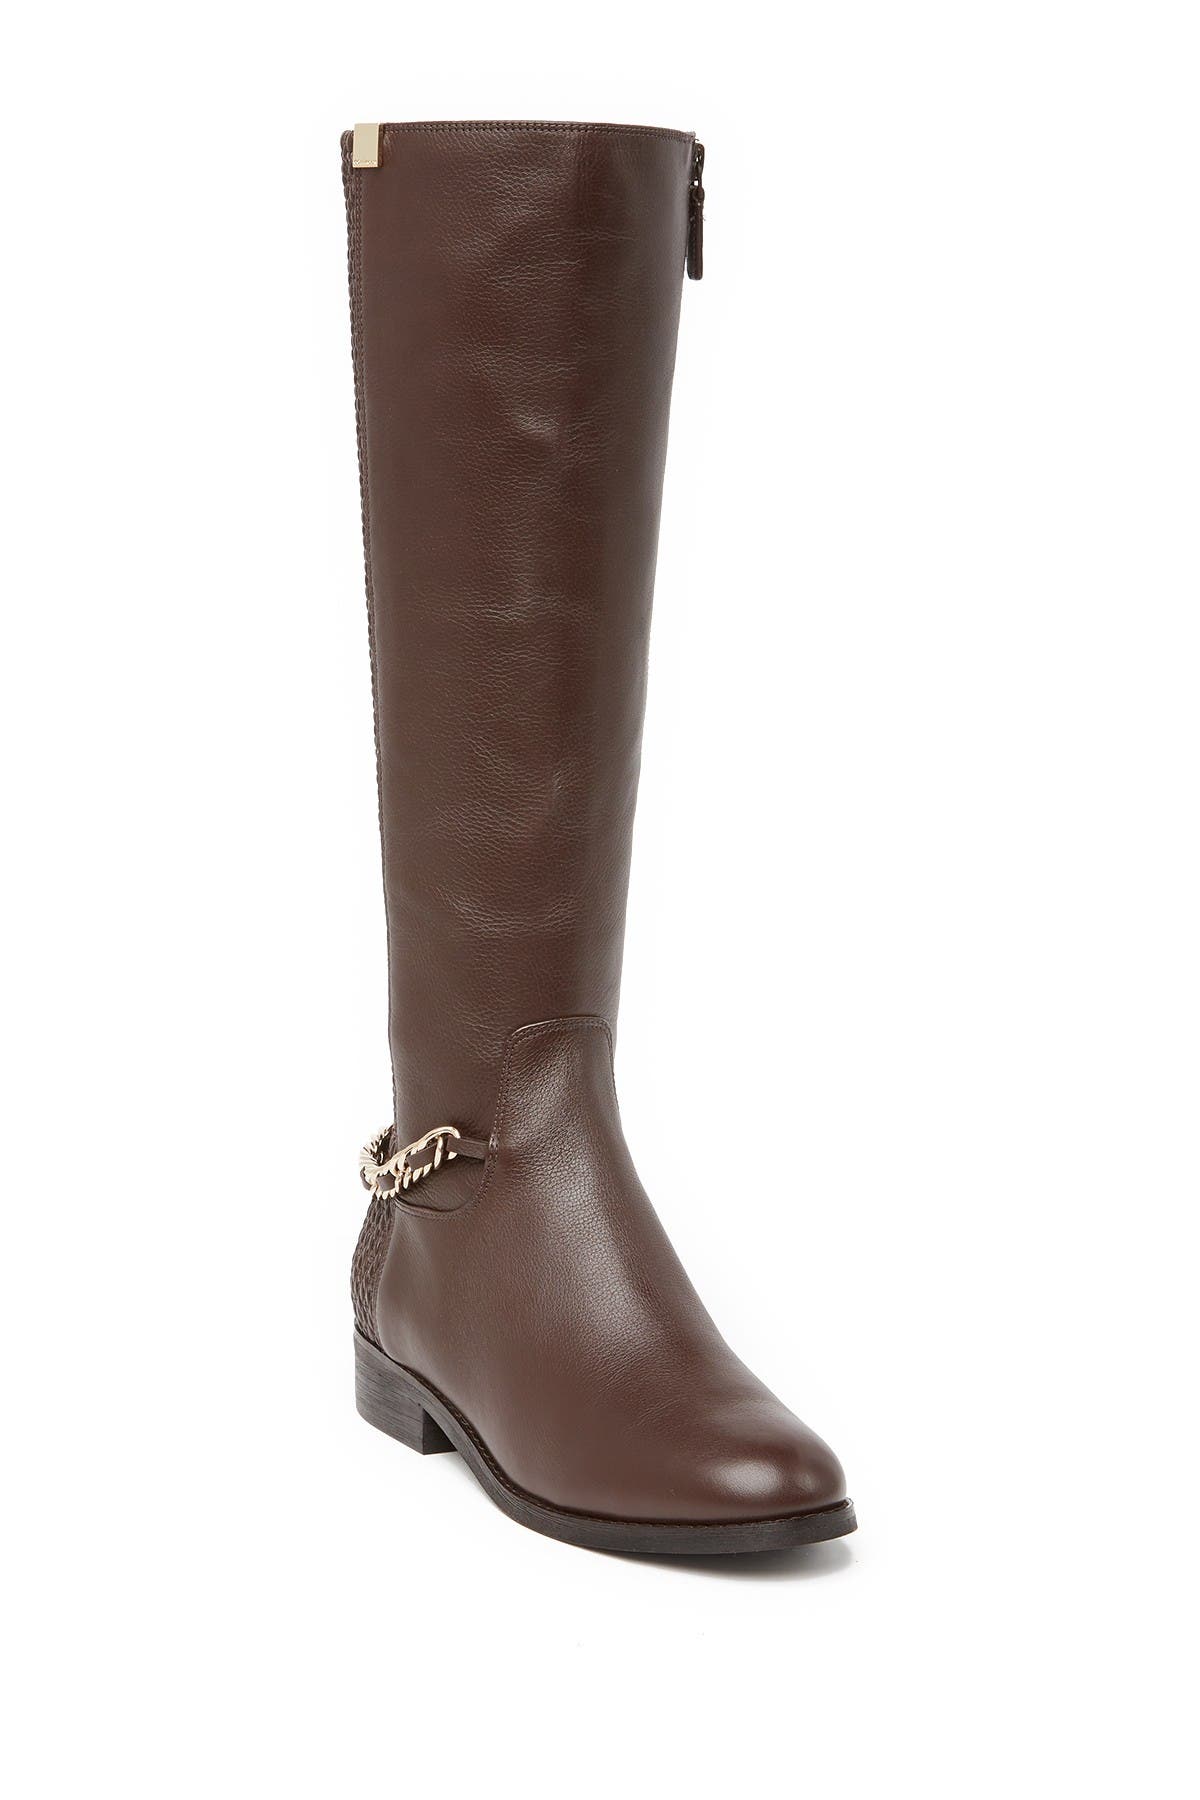 cole haan riding boots nordstrom